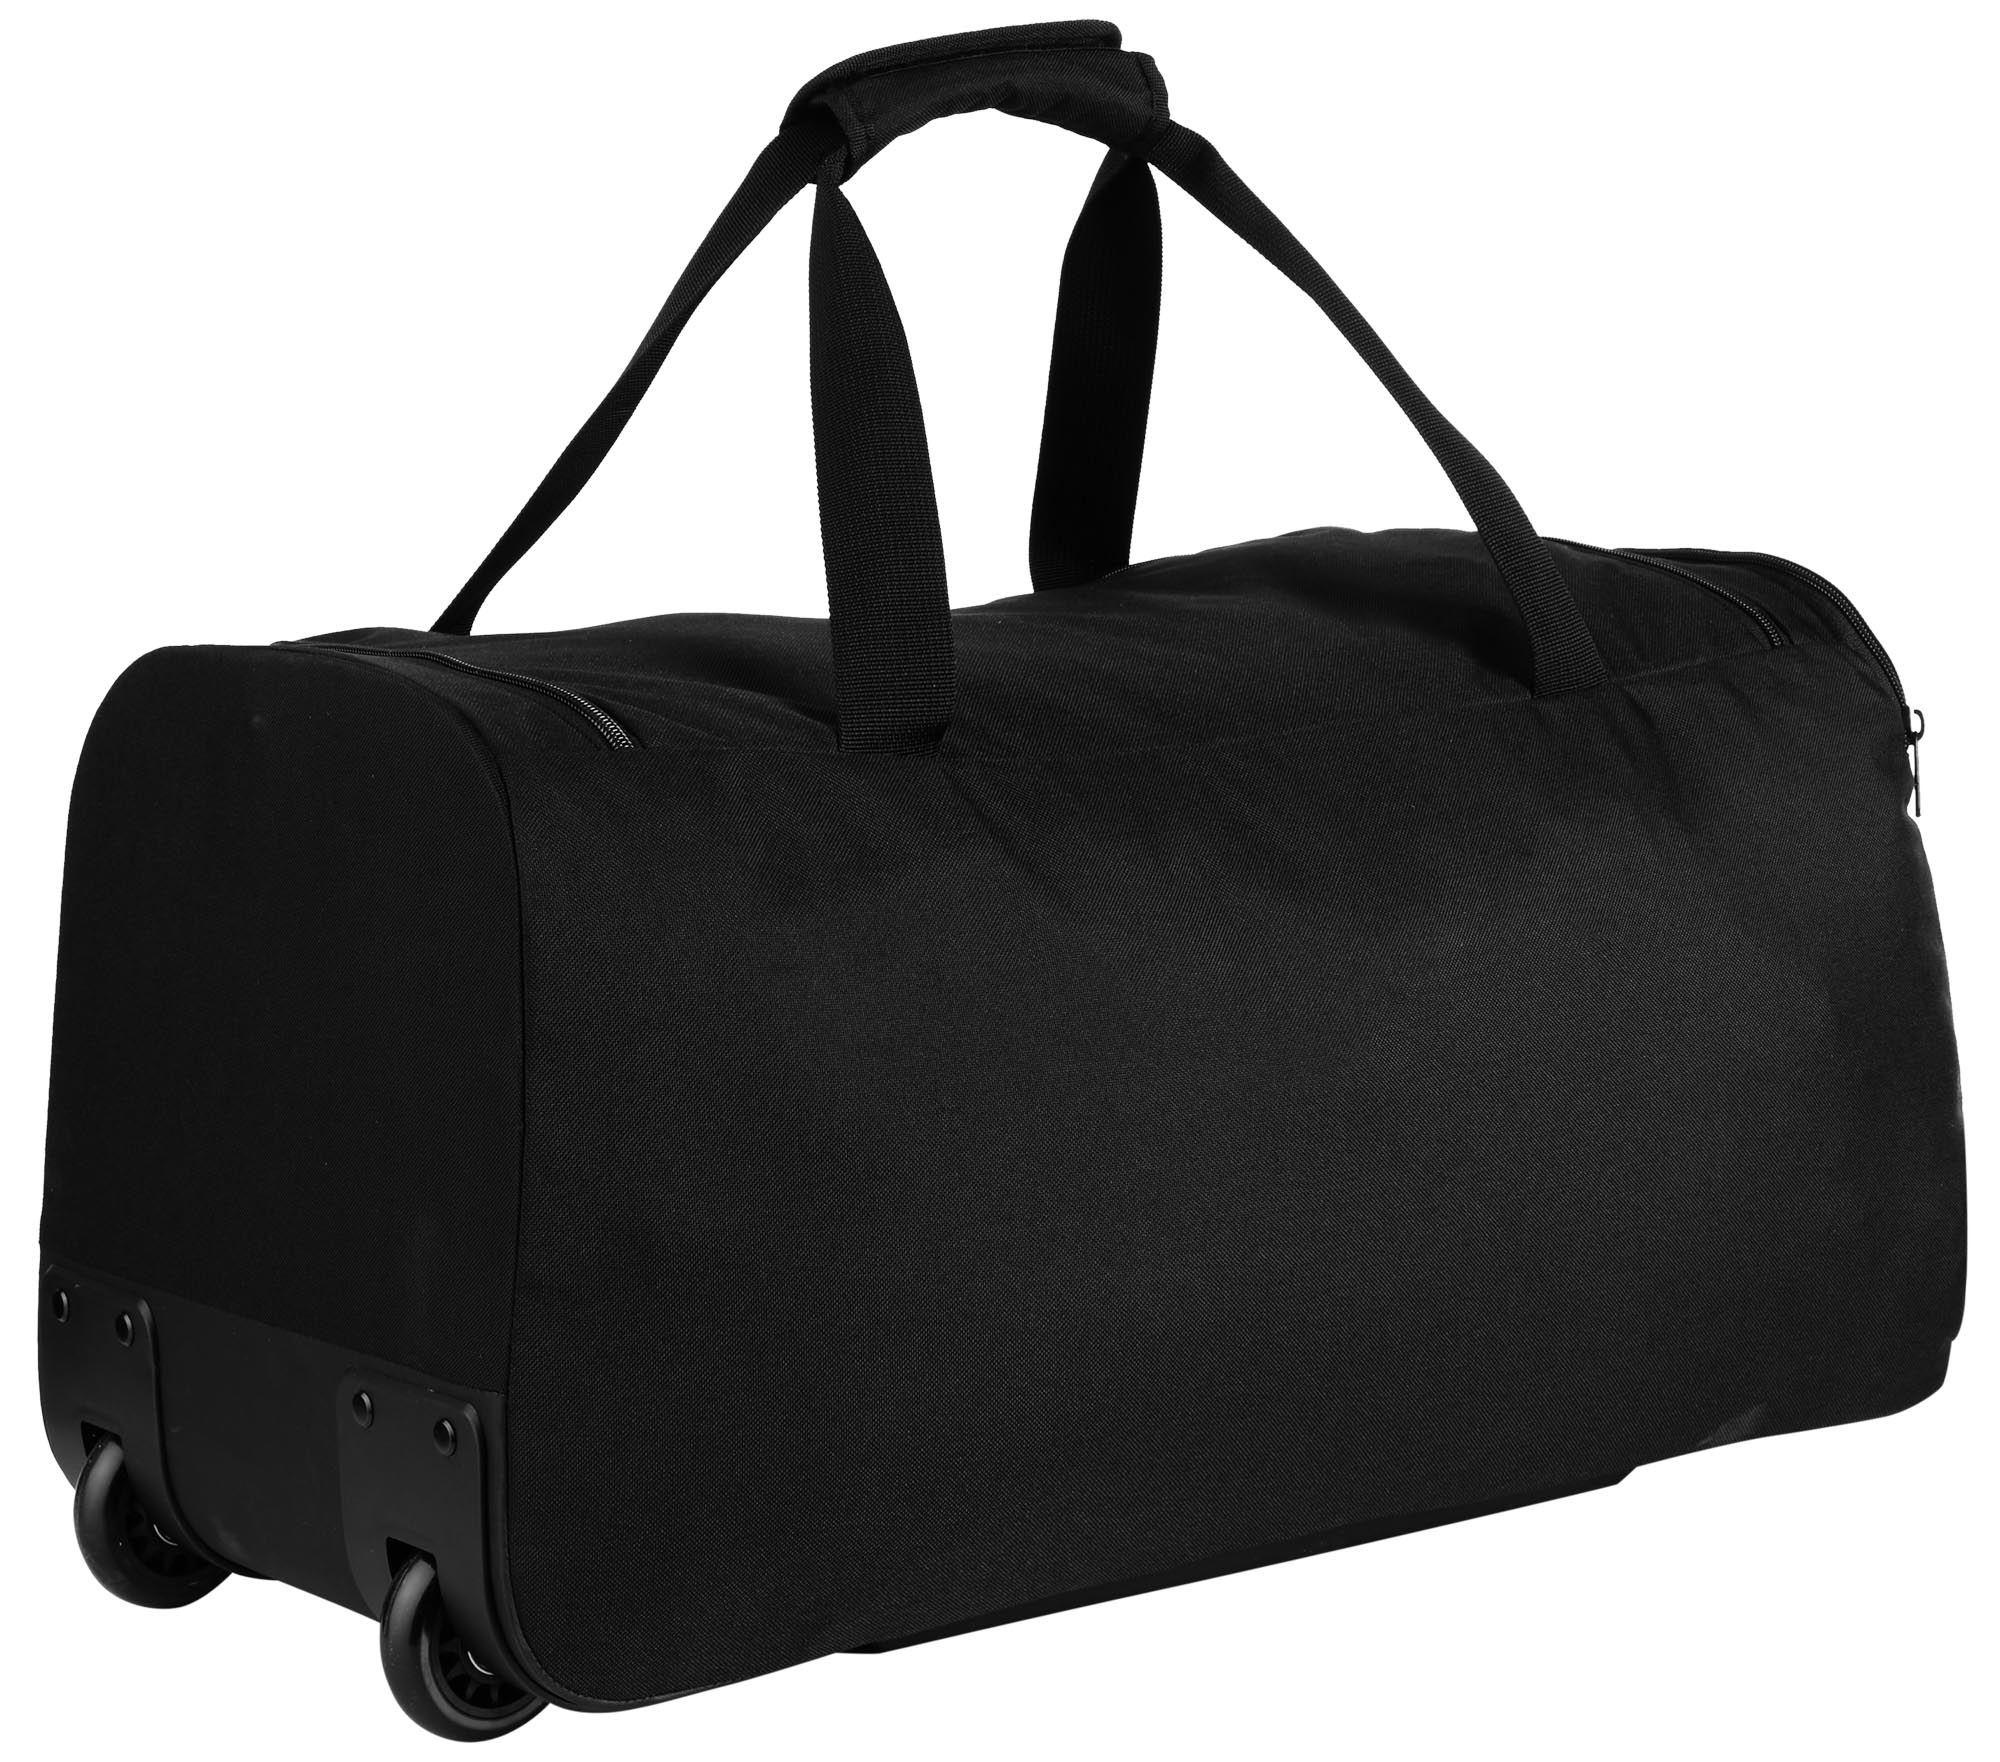 Sports bag with wheels